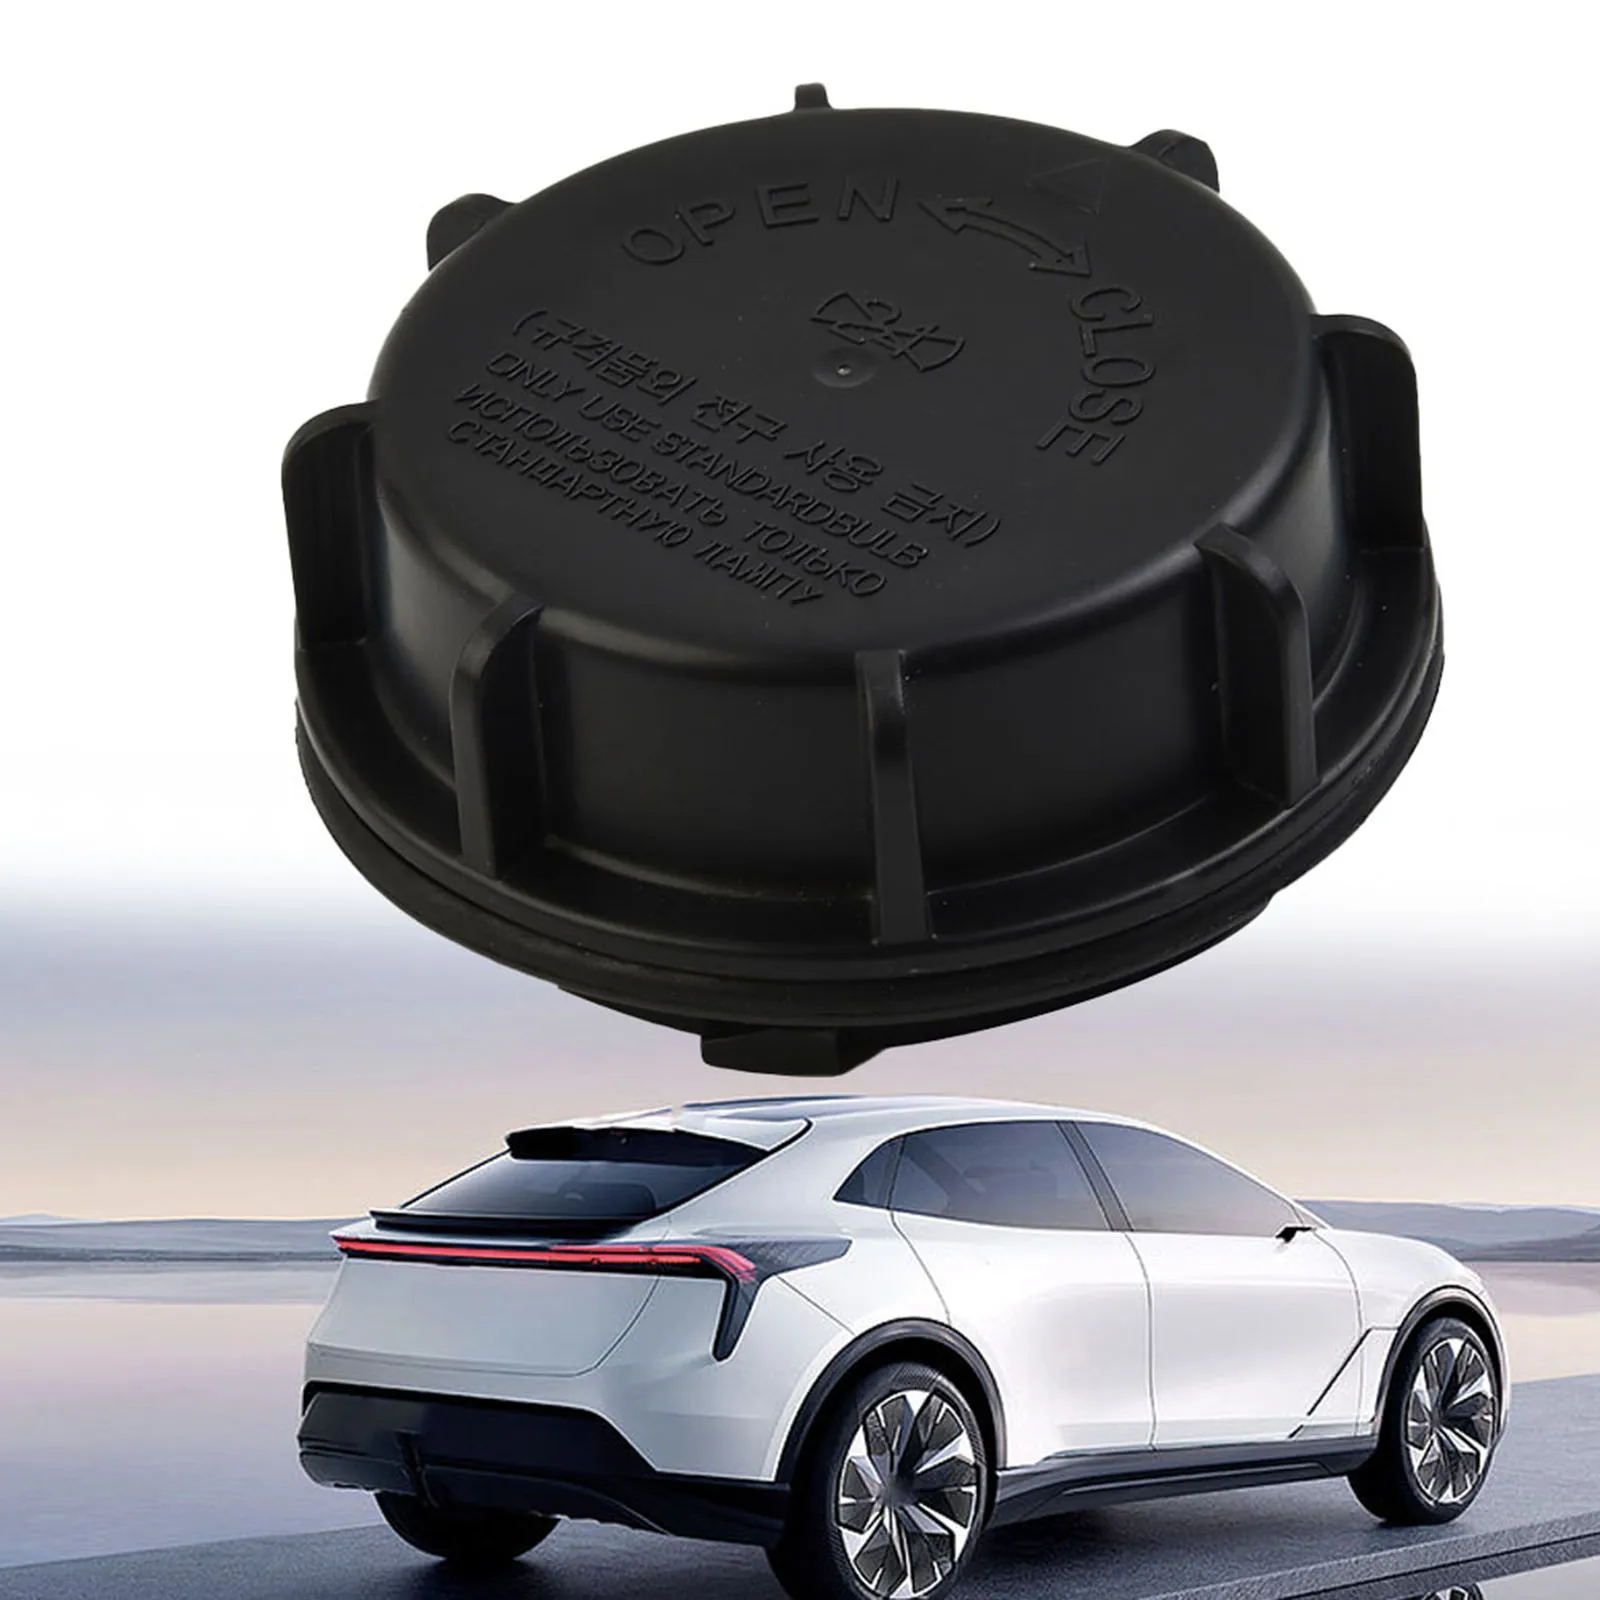 

1pc New Car Headlight Lamp Bulb Dust Cover Cap ABS Black #92140-3K000 For Kia For Hyundai For Sportage For Ceed Easy To Install